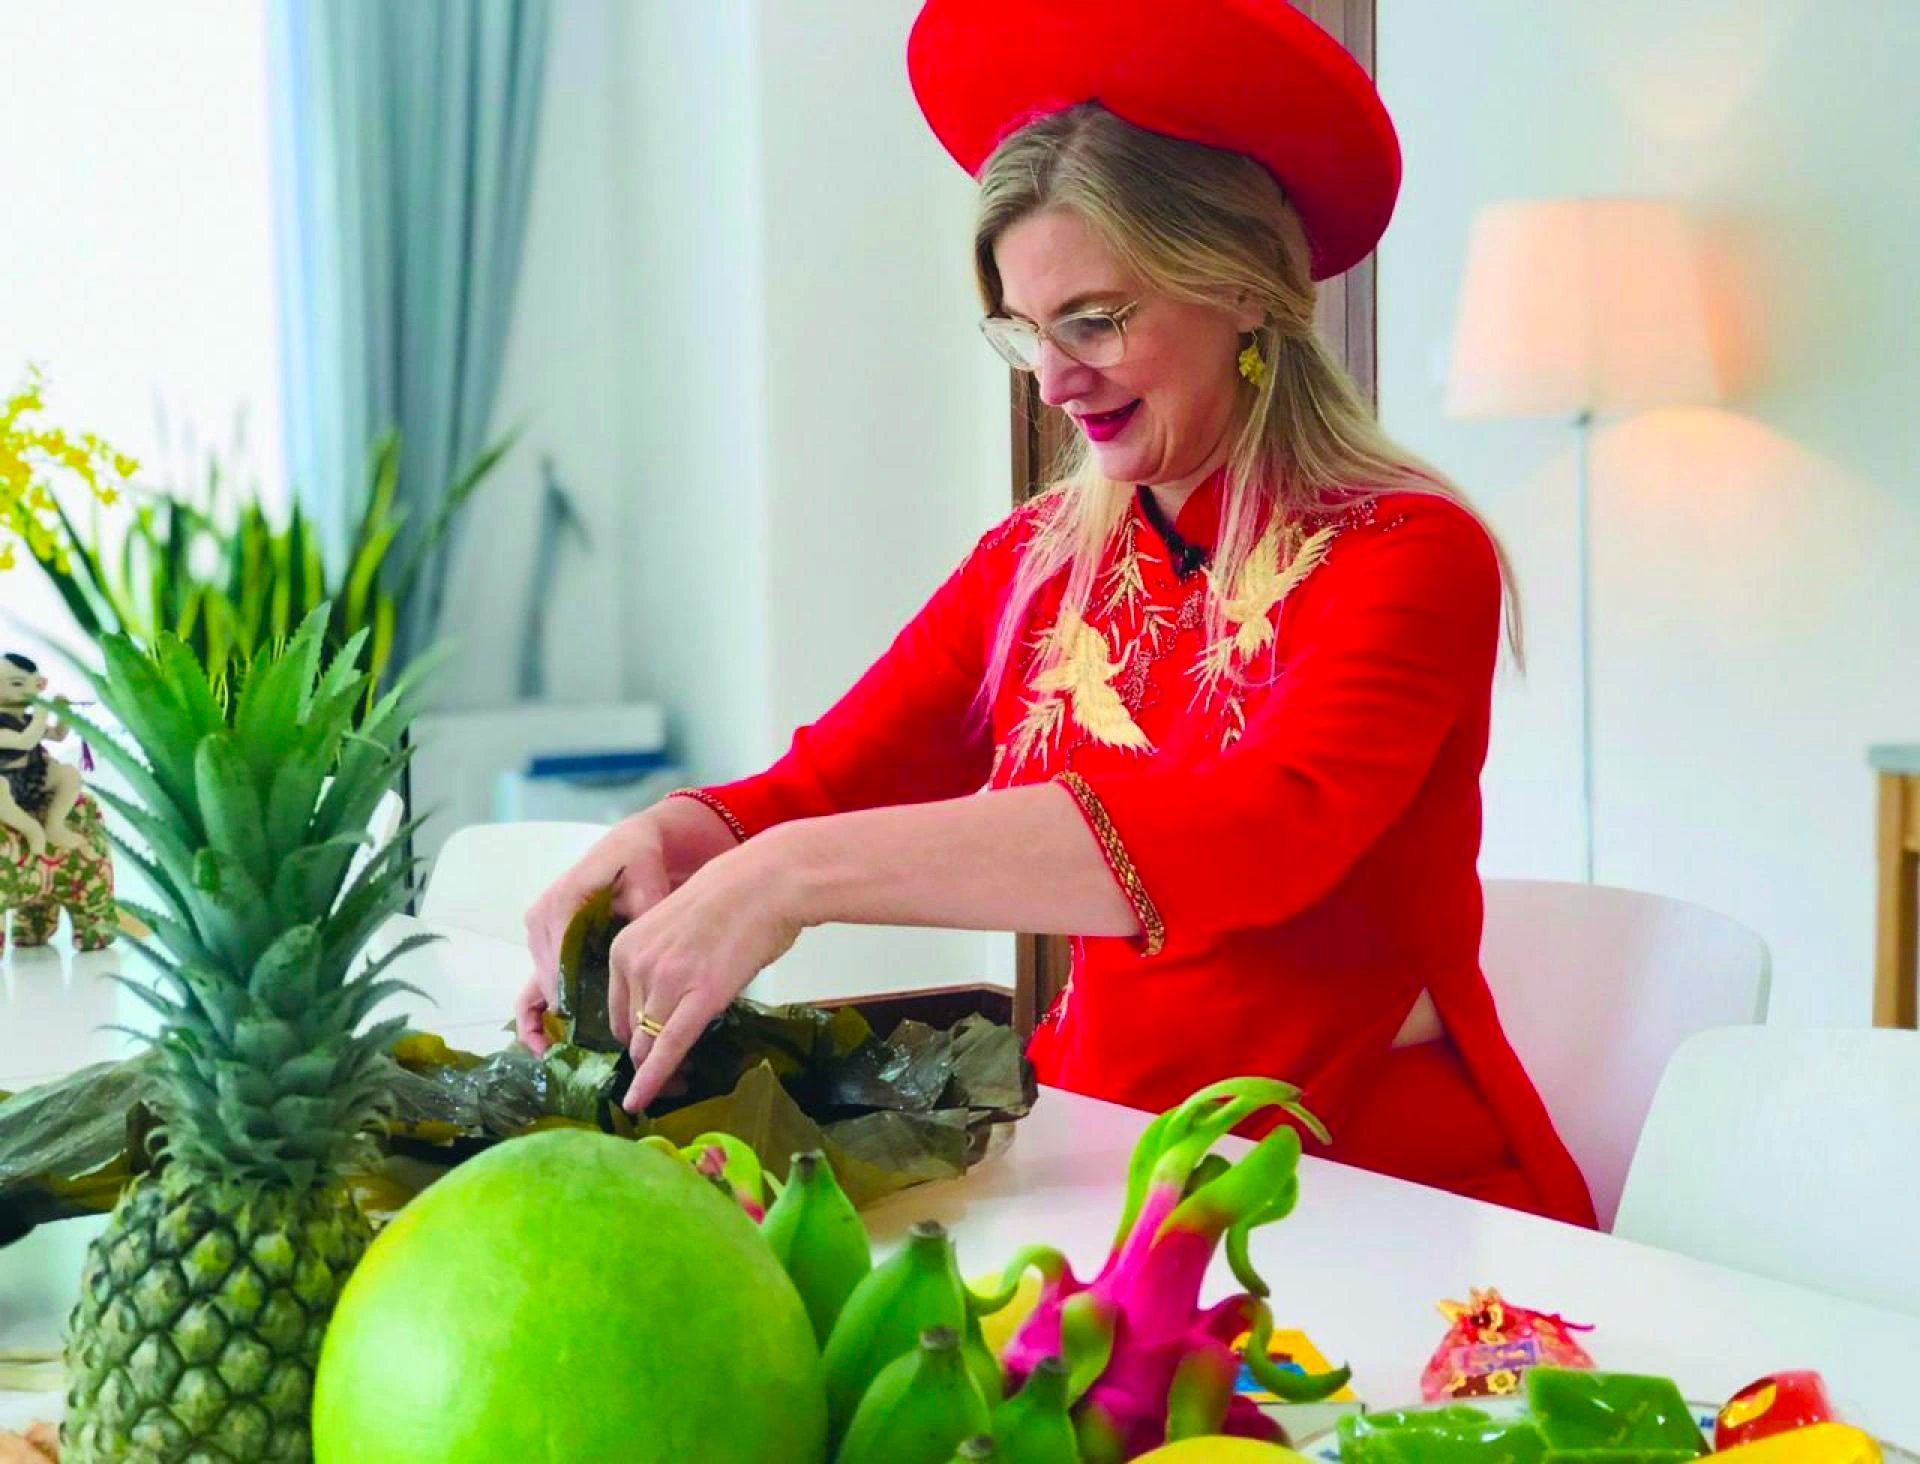 In this photo, Swedish Ambassador to Vietnam Ann Måwe wears 'áo dài' (Vietnamese traditional costume) and Vietnamese traditional turban 'khăn đóng' while opening a loaf of banh chung (Vietnamese traditional Tet food in the northern region).